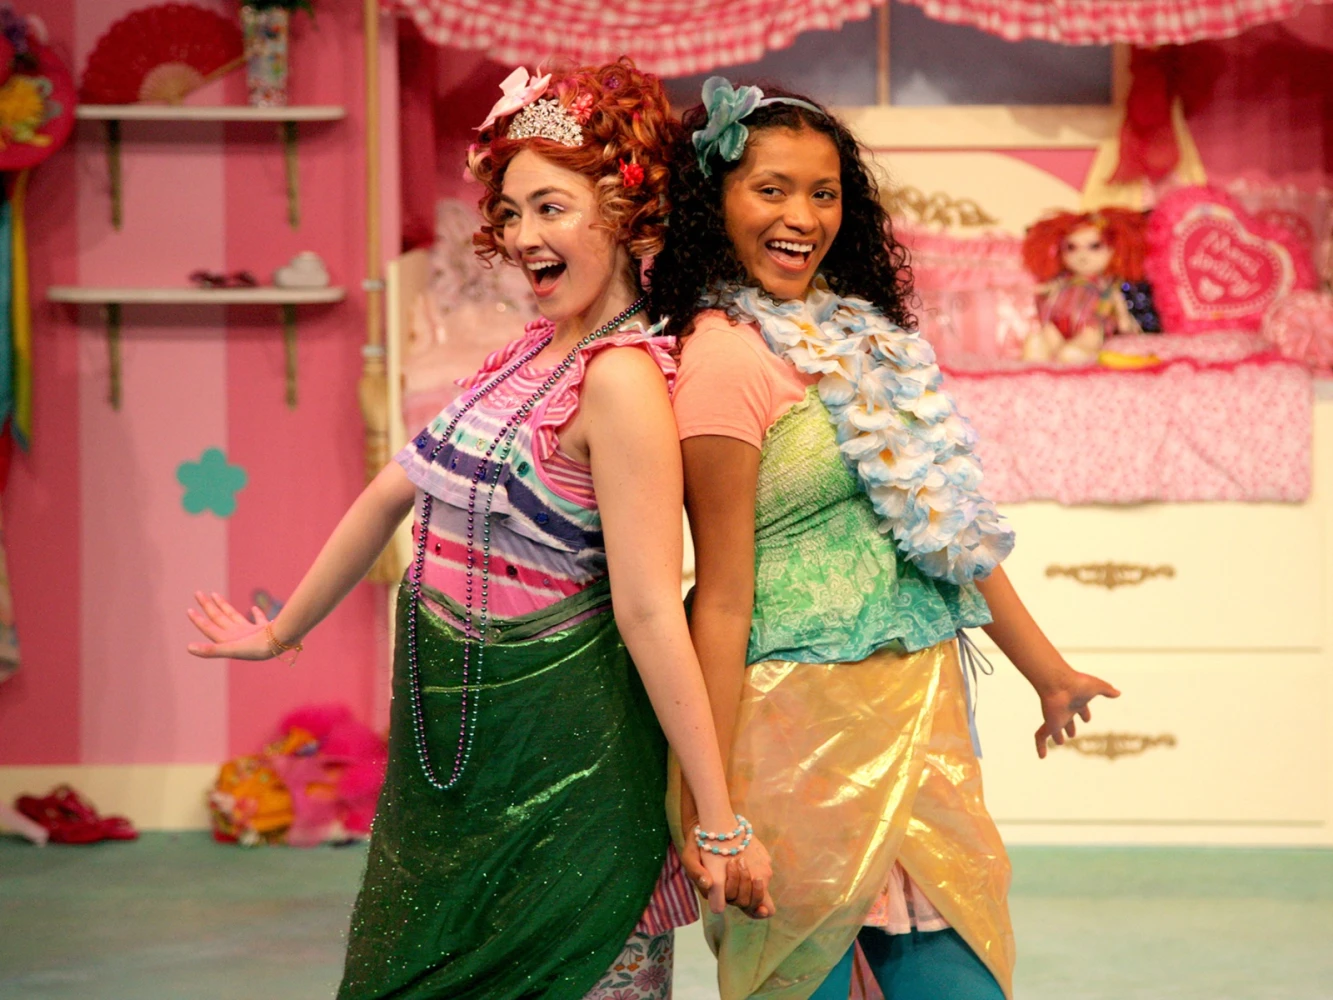 Fancy Nancy The Musical: What to expect - 2